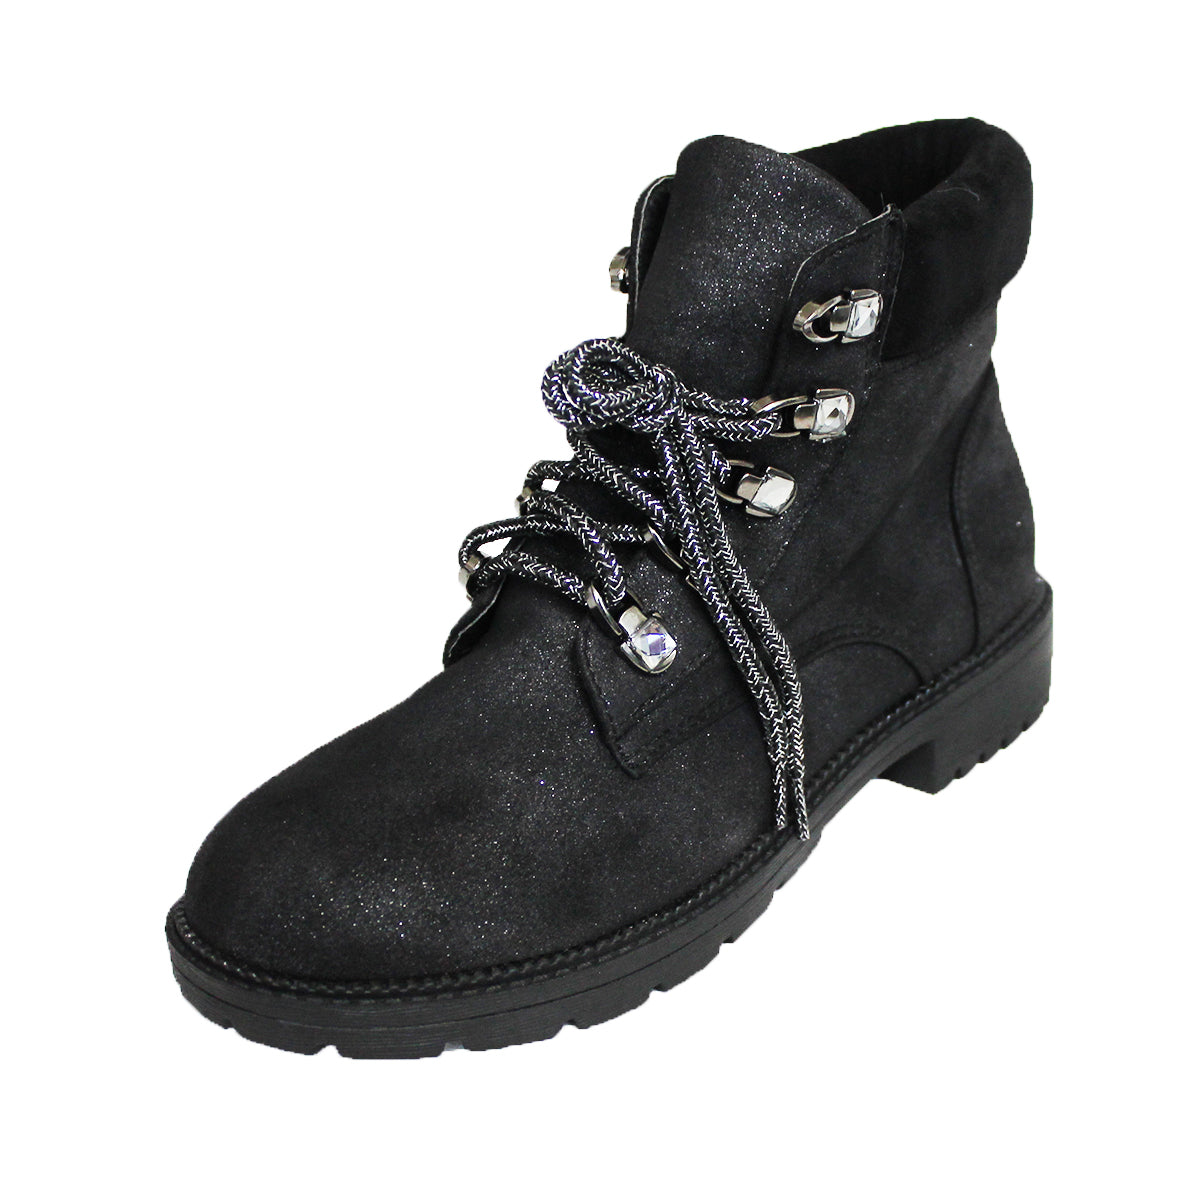 Black glitter effect chunky sole flat ankle boots